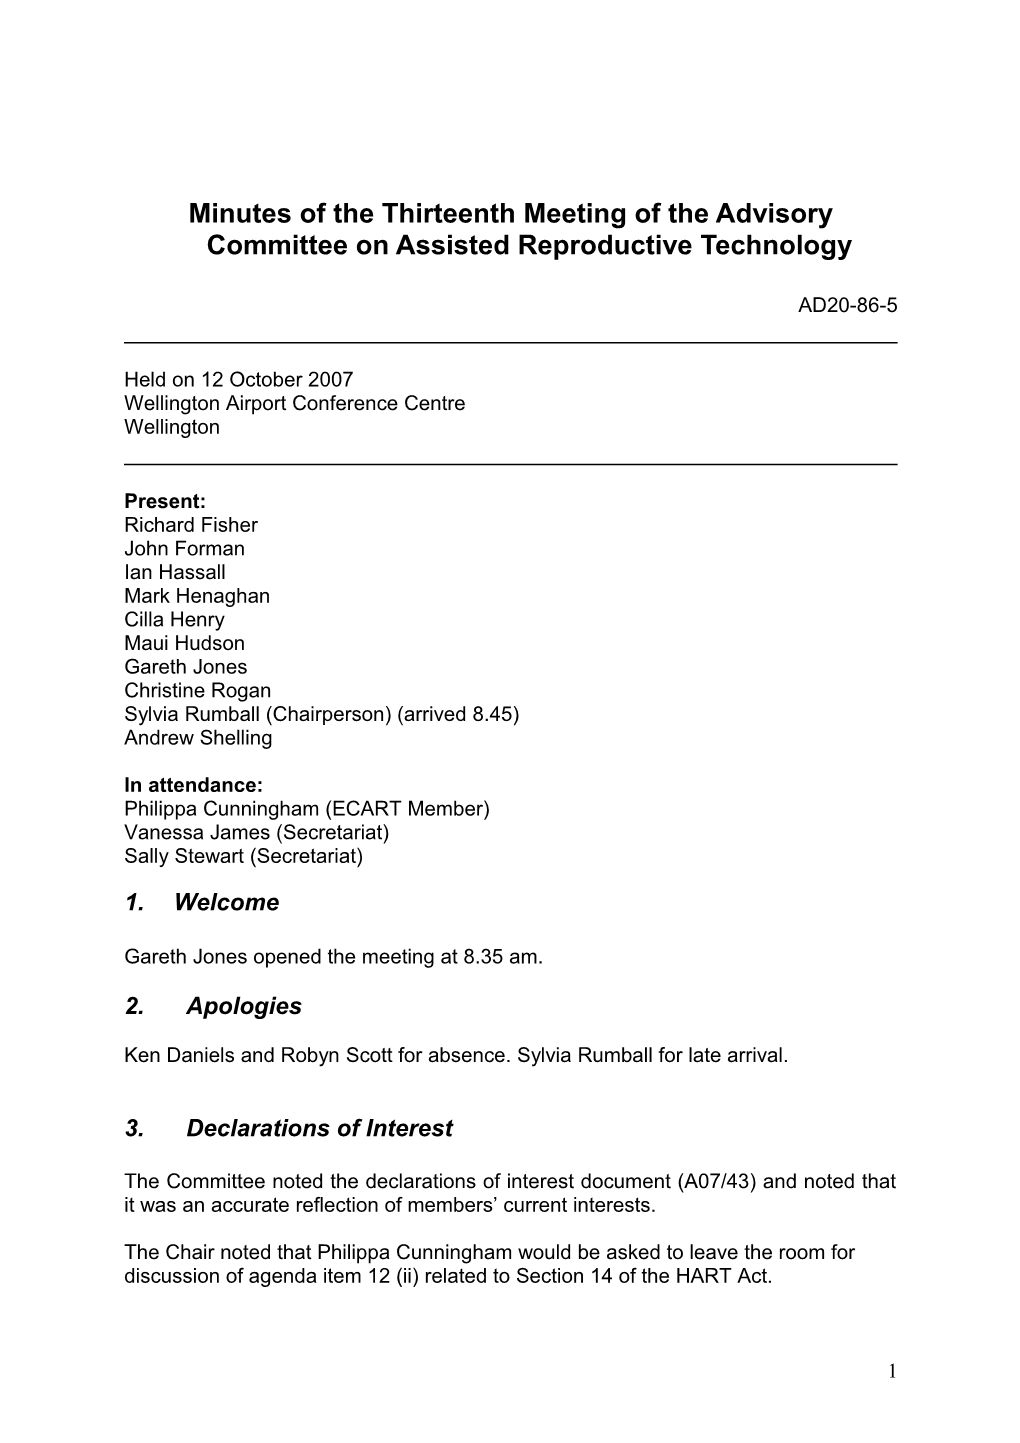 Minutes of the Eleventh Meeting of the Advisory Committee on Assisted Reproductive Technology